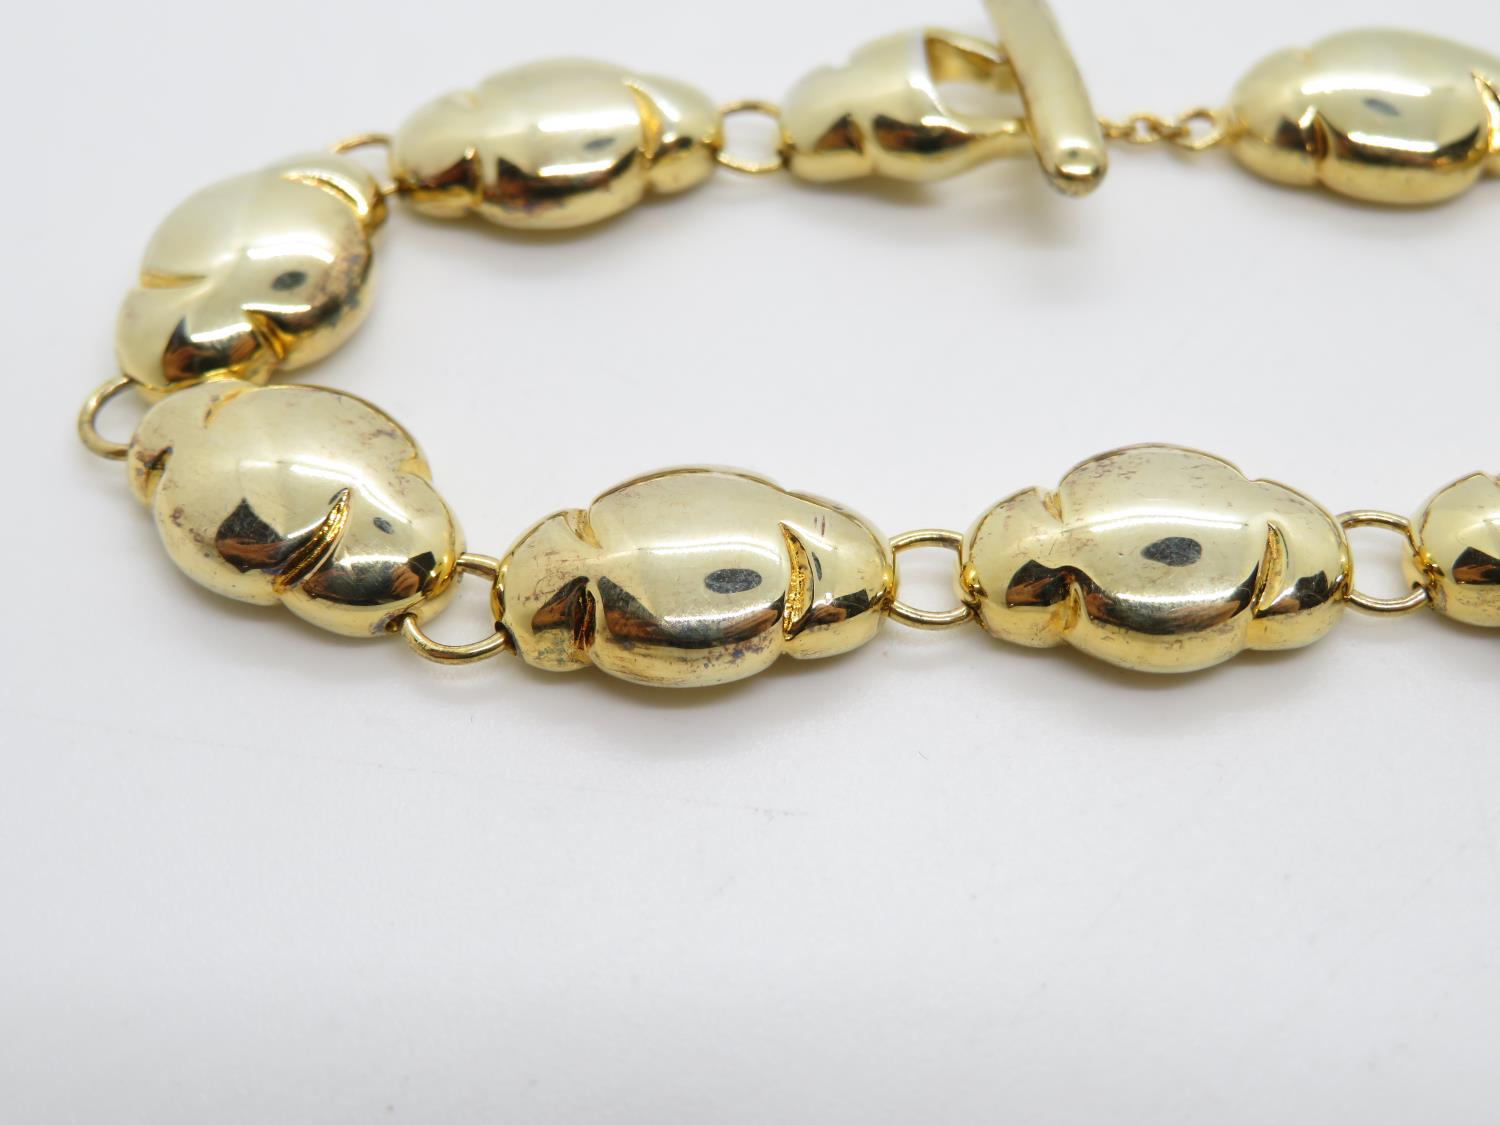 Heavy gold on silver bracelet with toggle fastener 7.5" 23g - Image 2 of 2